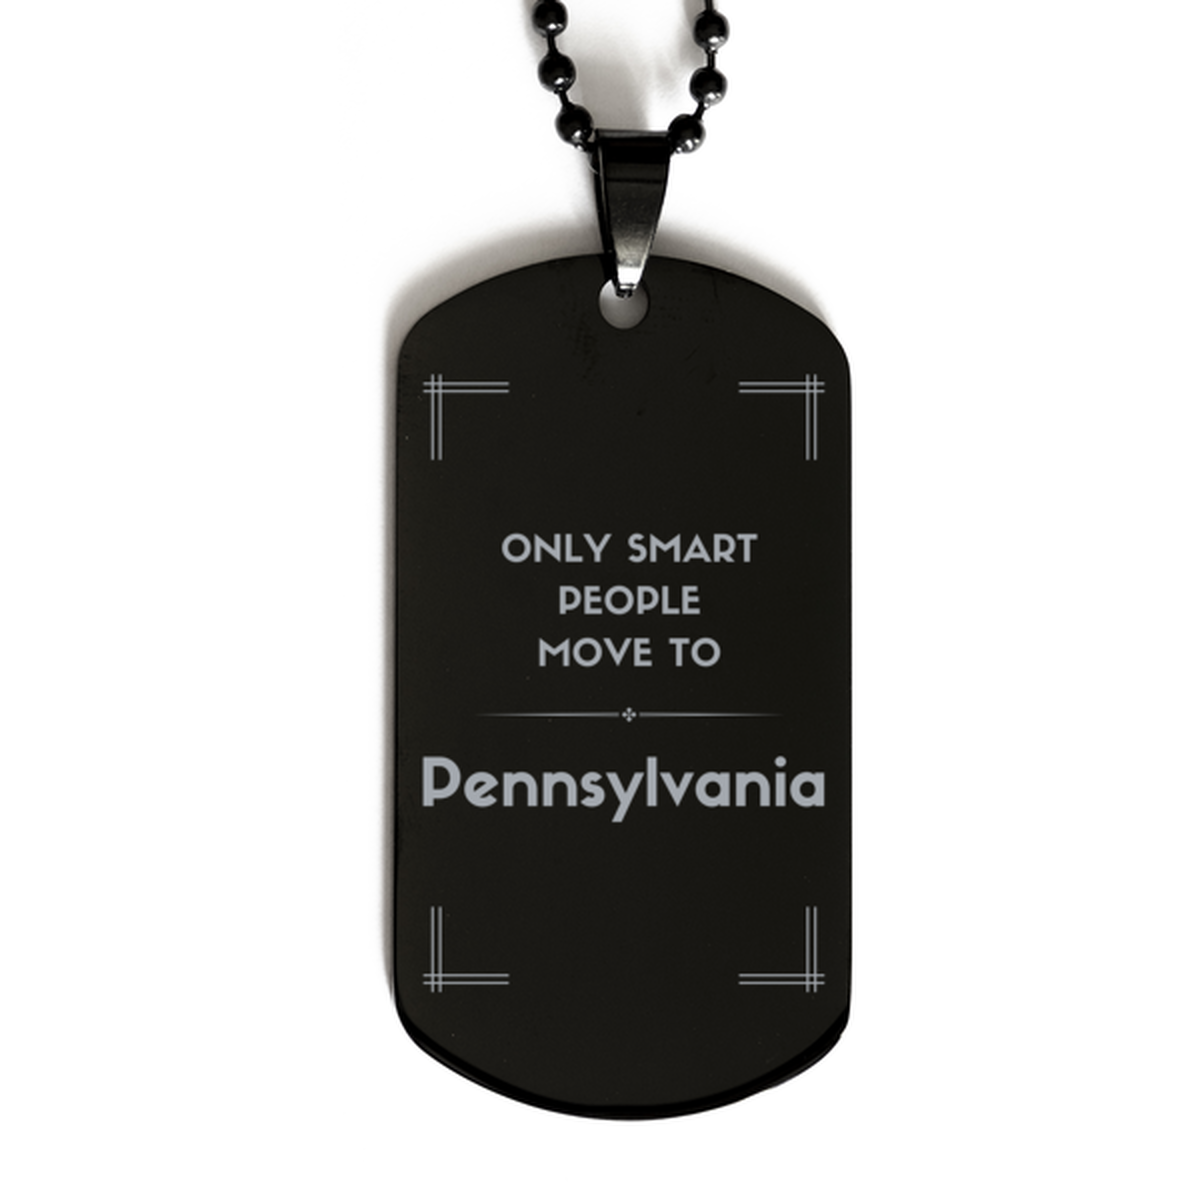 Only smart people move to Pennsylvania Black Dog Tag, Gag Gifts For Pennsylvania, Move to Pennsylvania Gifts for Friends Coworker Funny Saying Quote